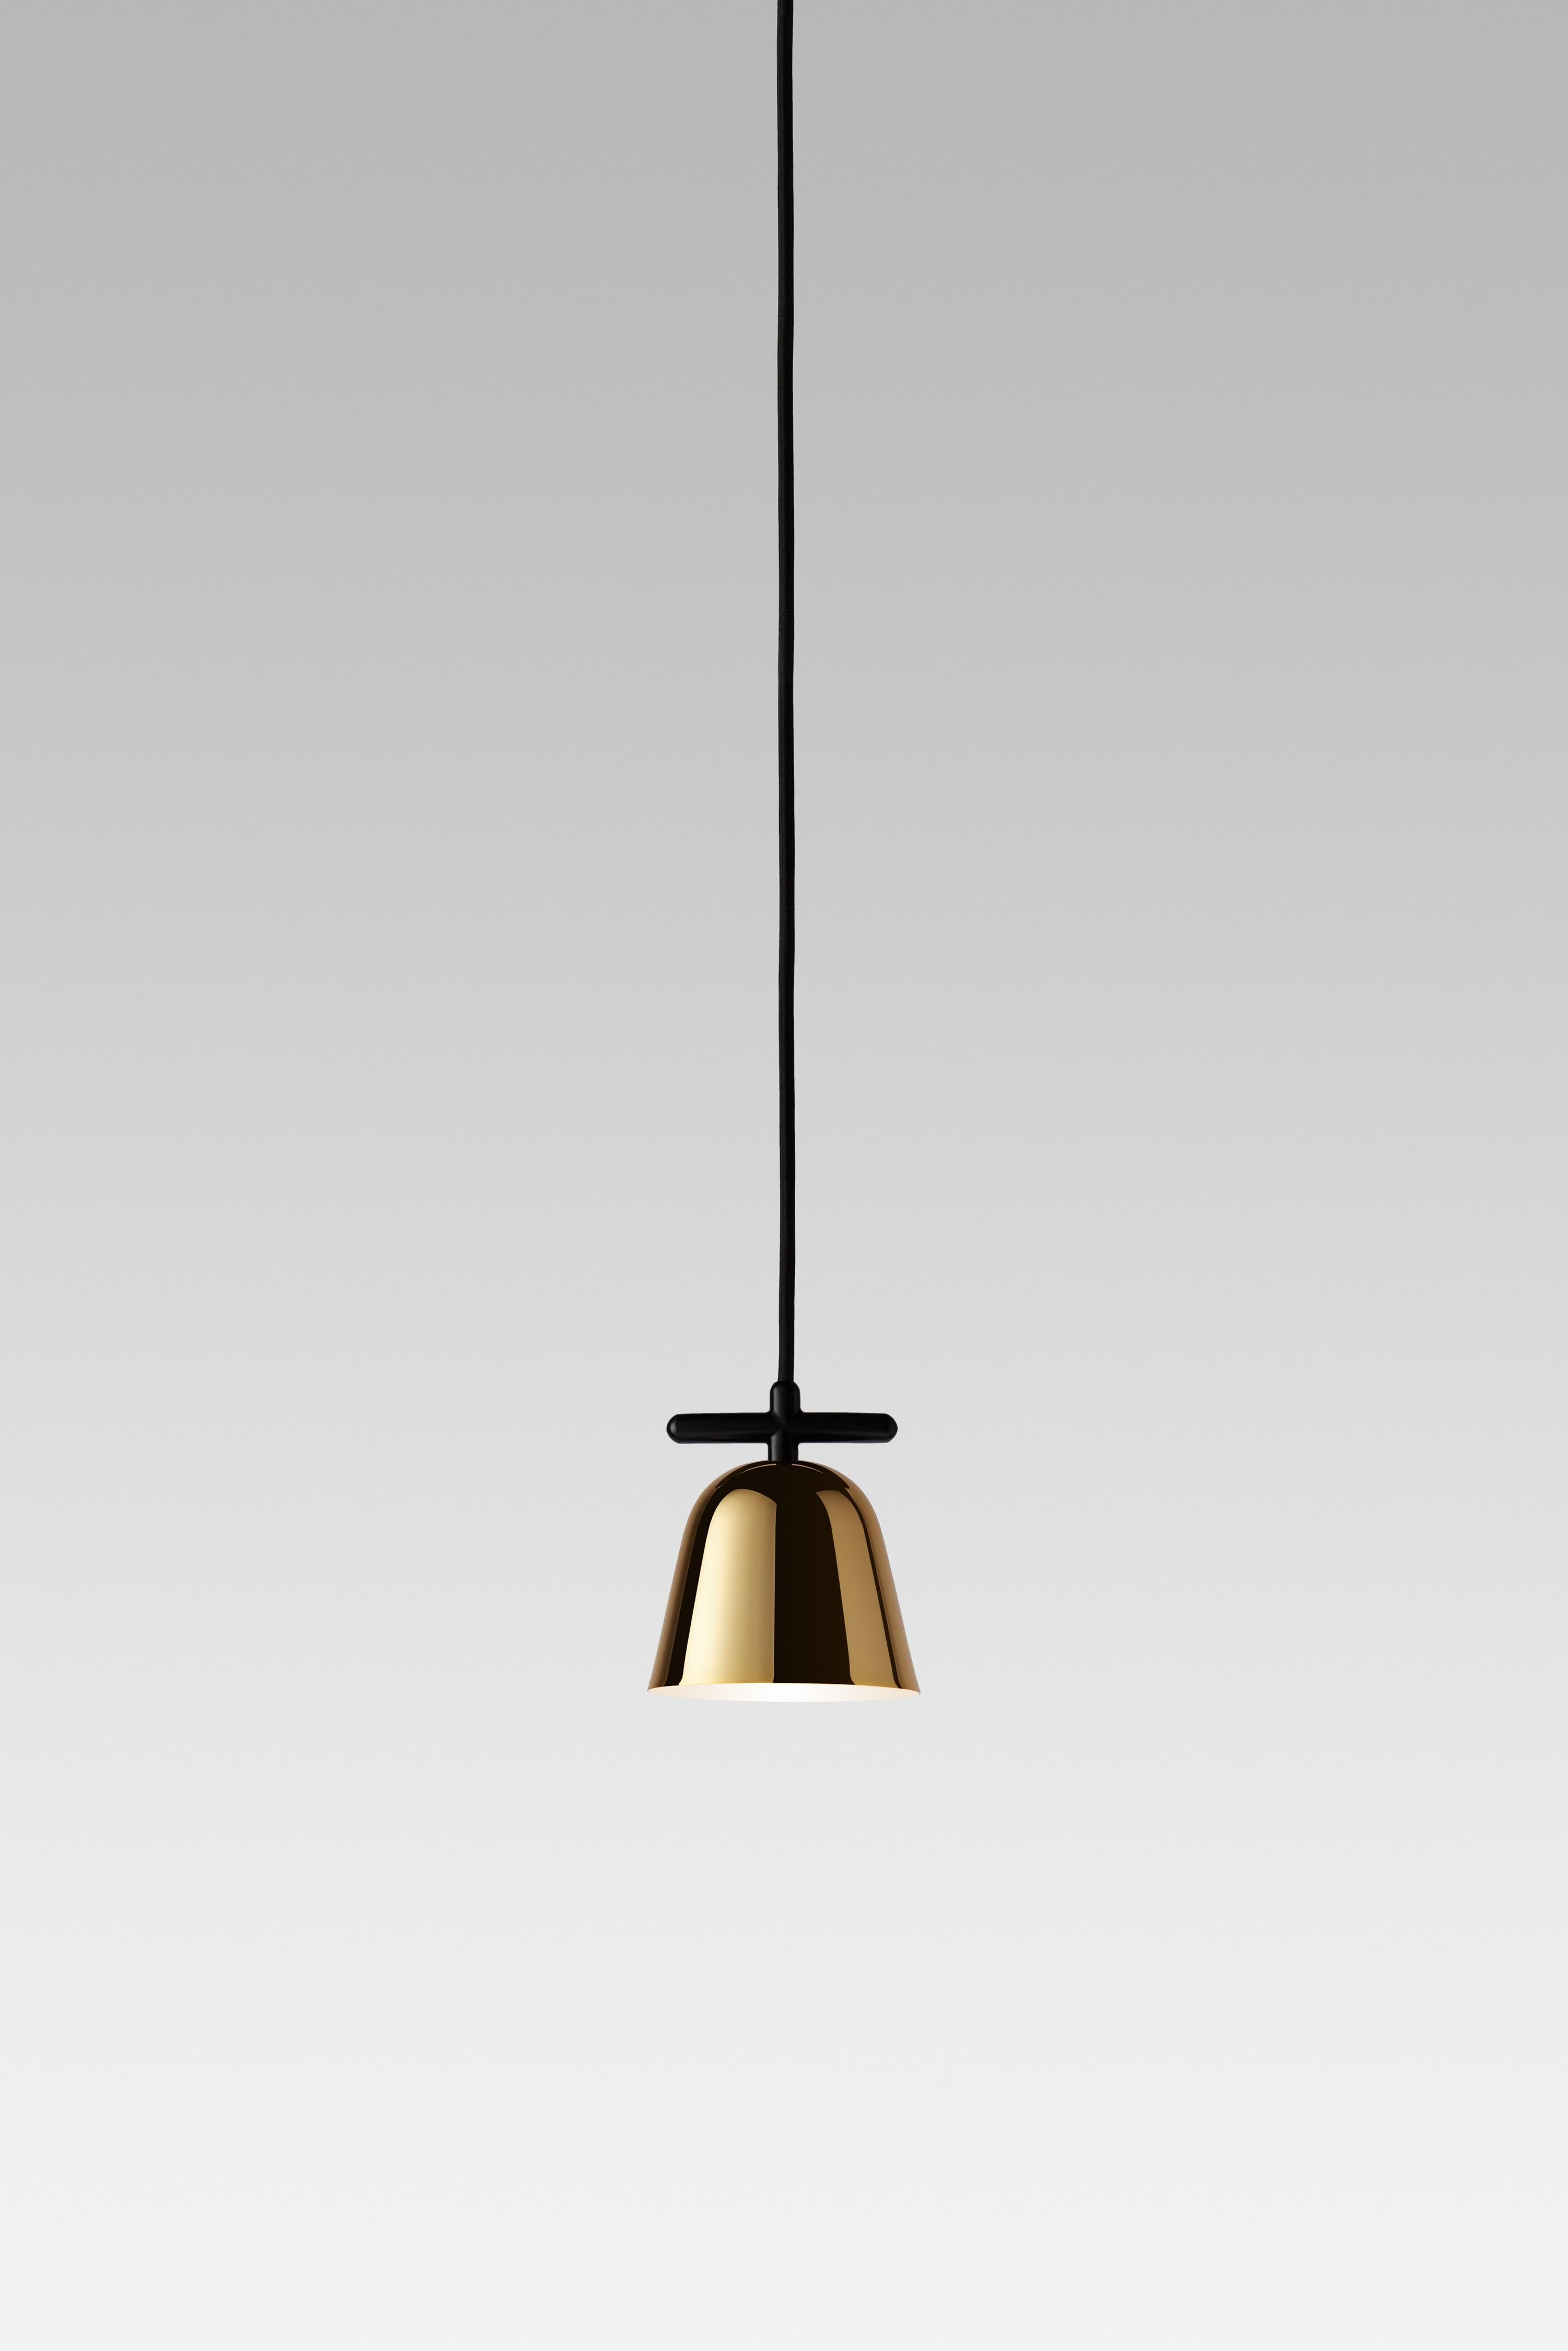 Lighto T PE by Jaime Hayon
Manufactured by Parachilna.

This is a skinny yet characteristic collection. So simple yet so unique, with stunning finishes.

Suspension lamp. Structure in black matt lacquered steel. Dome in golden glossy or black chrome